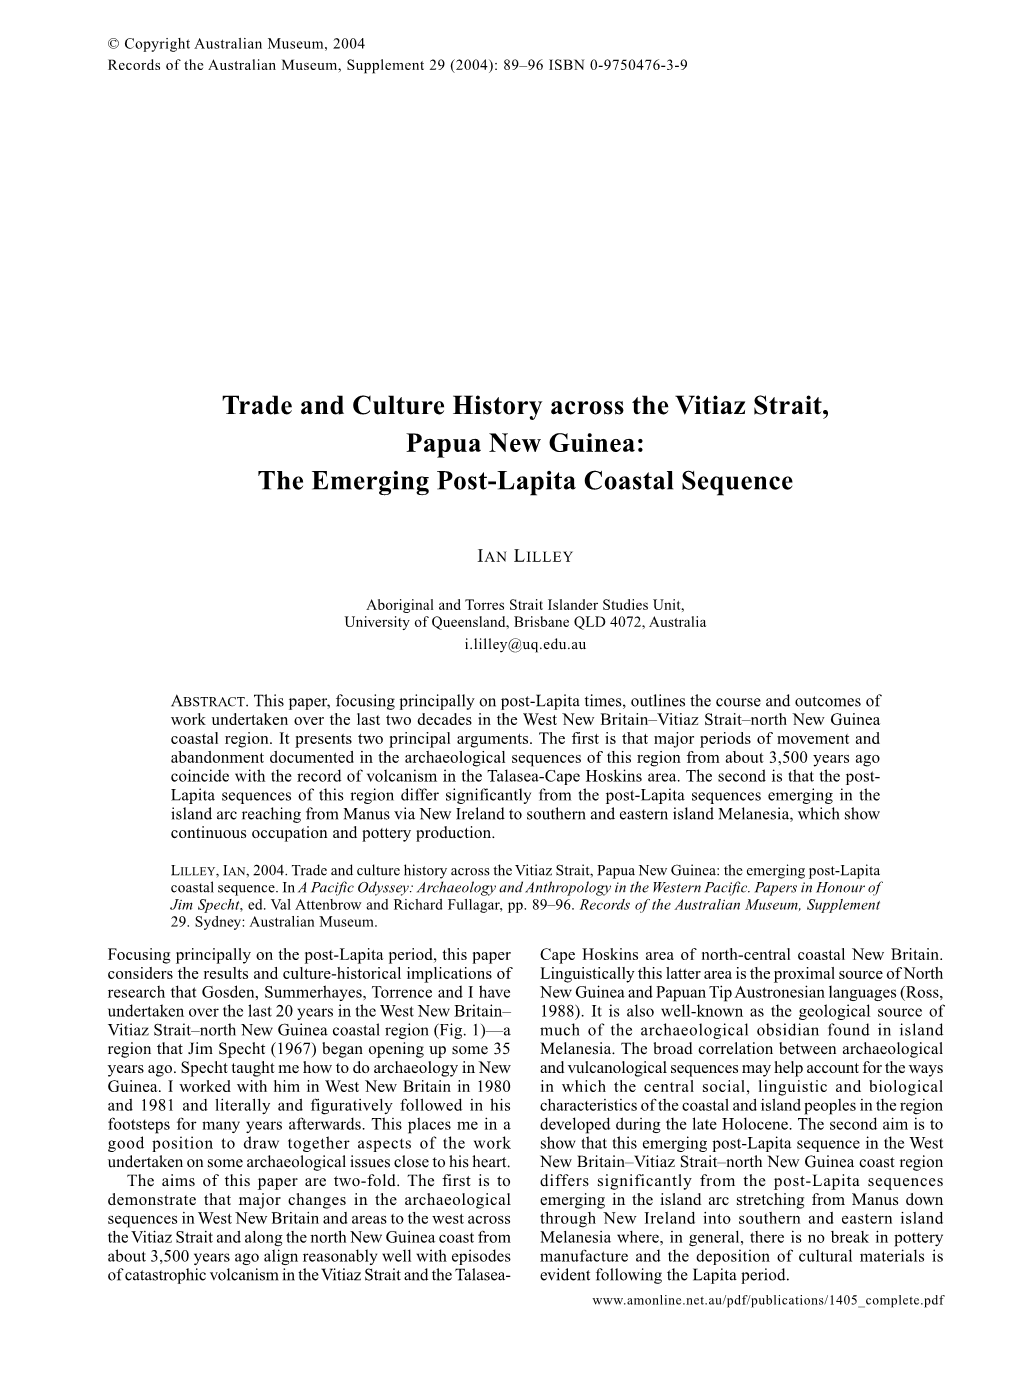 Trade and Culture History Across the Vitiaz Strait, Papua New Guinea: the Emerging Post-Lapita Coastal Sequence